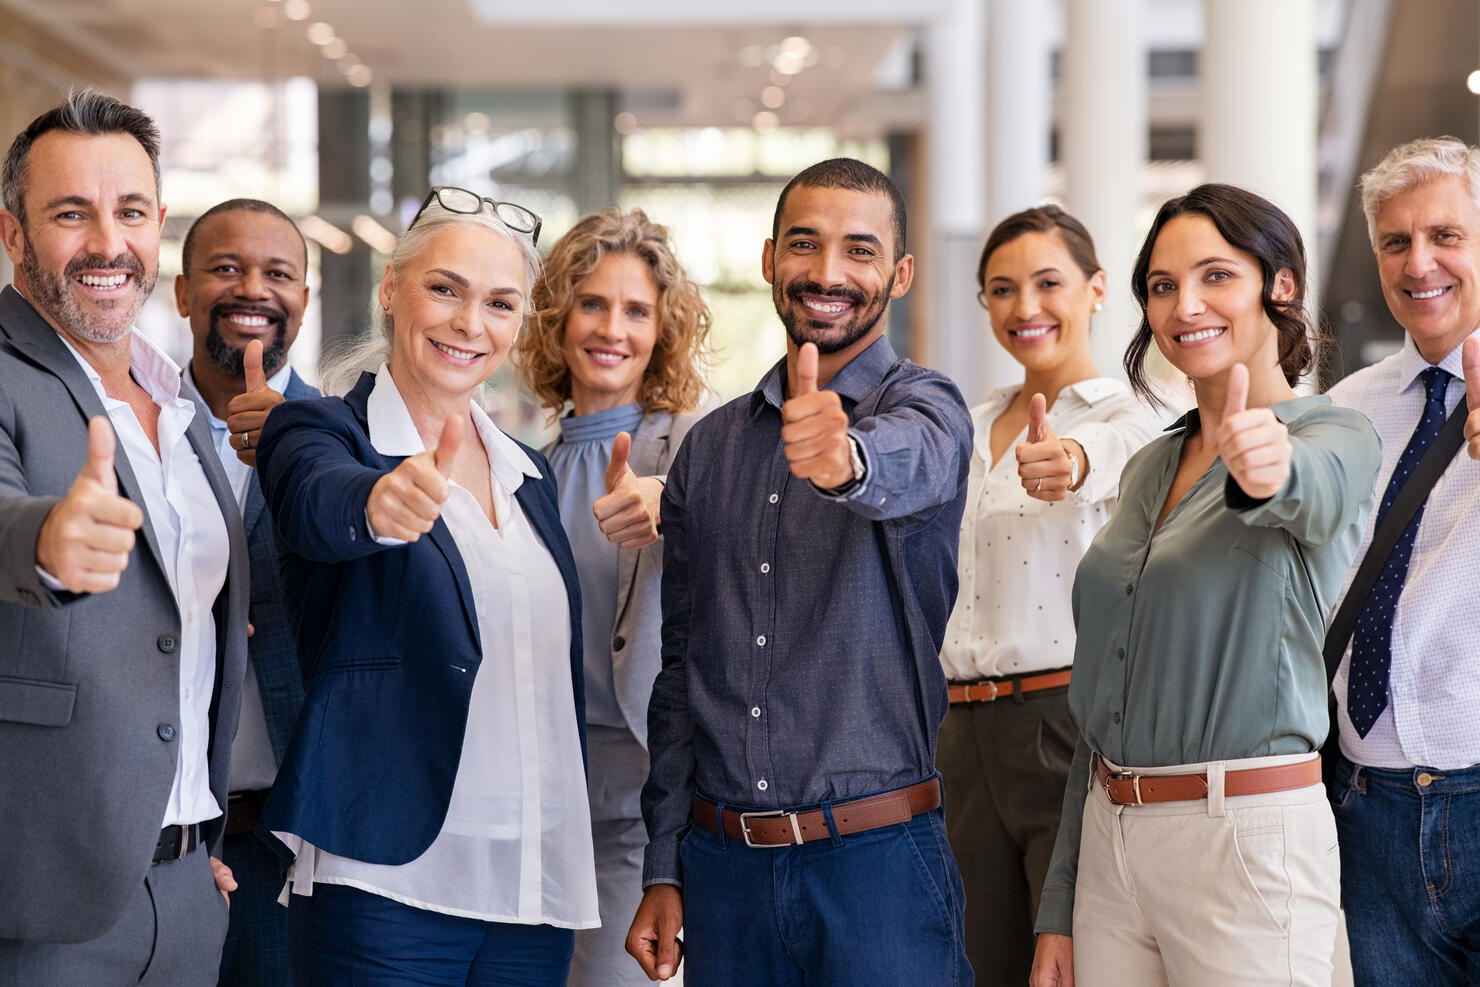 Group of successful business people showing thumbs up